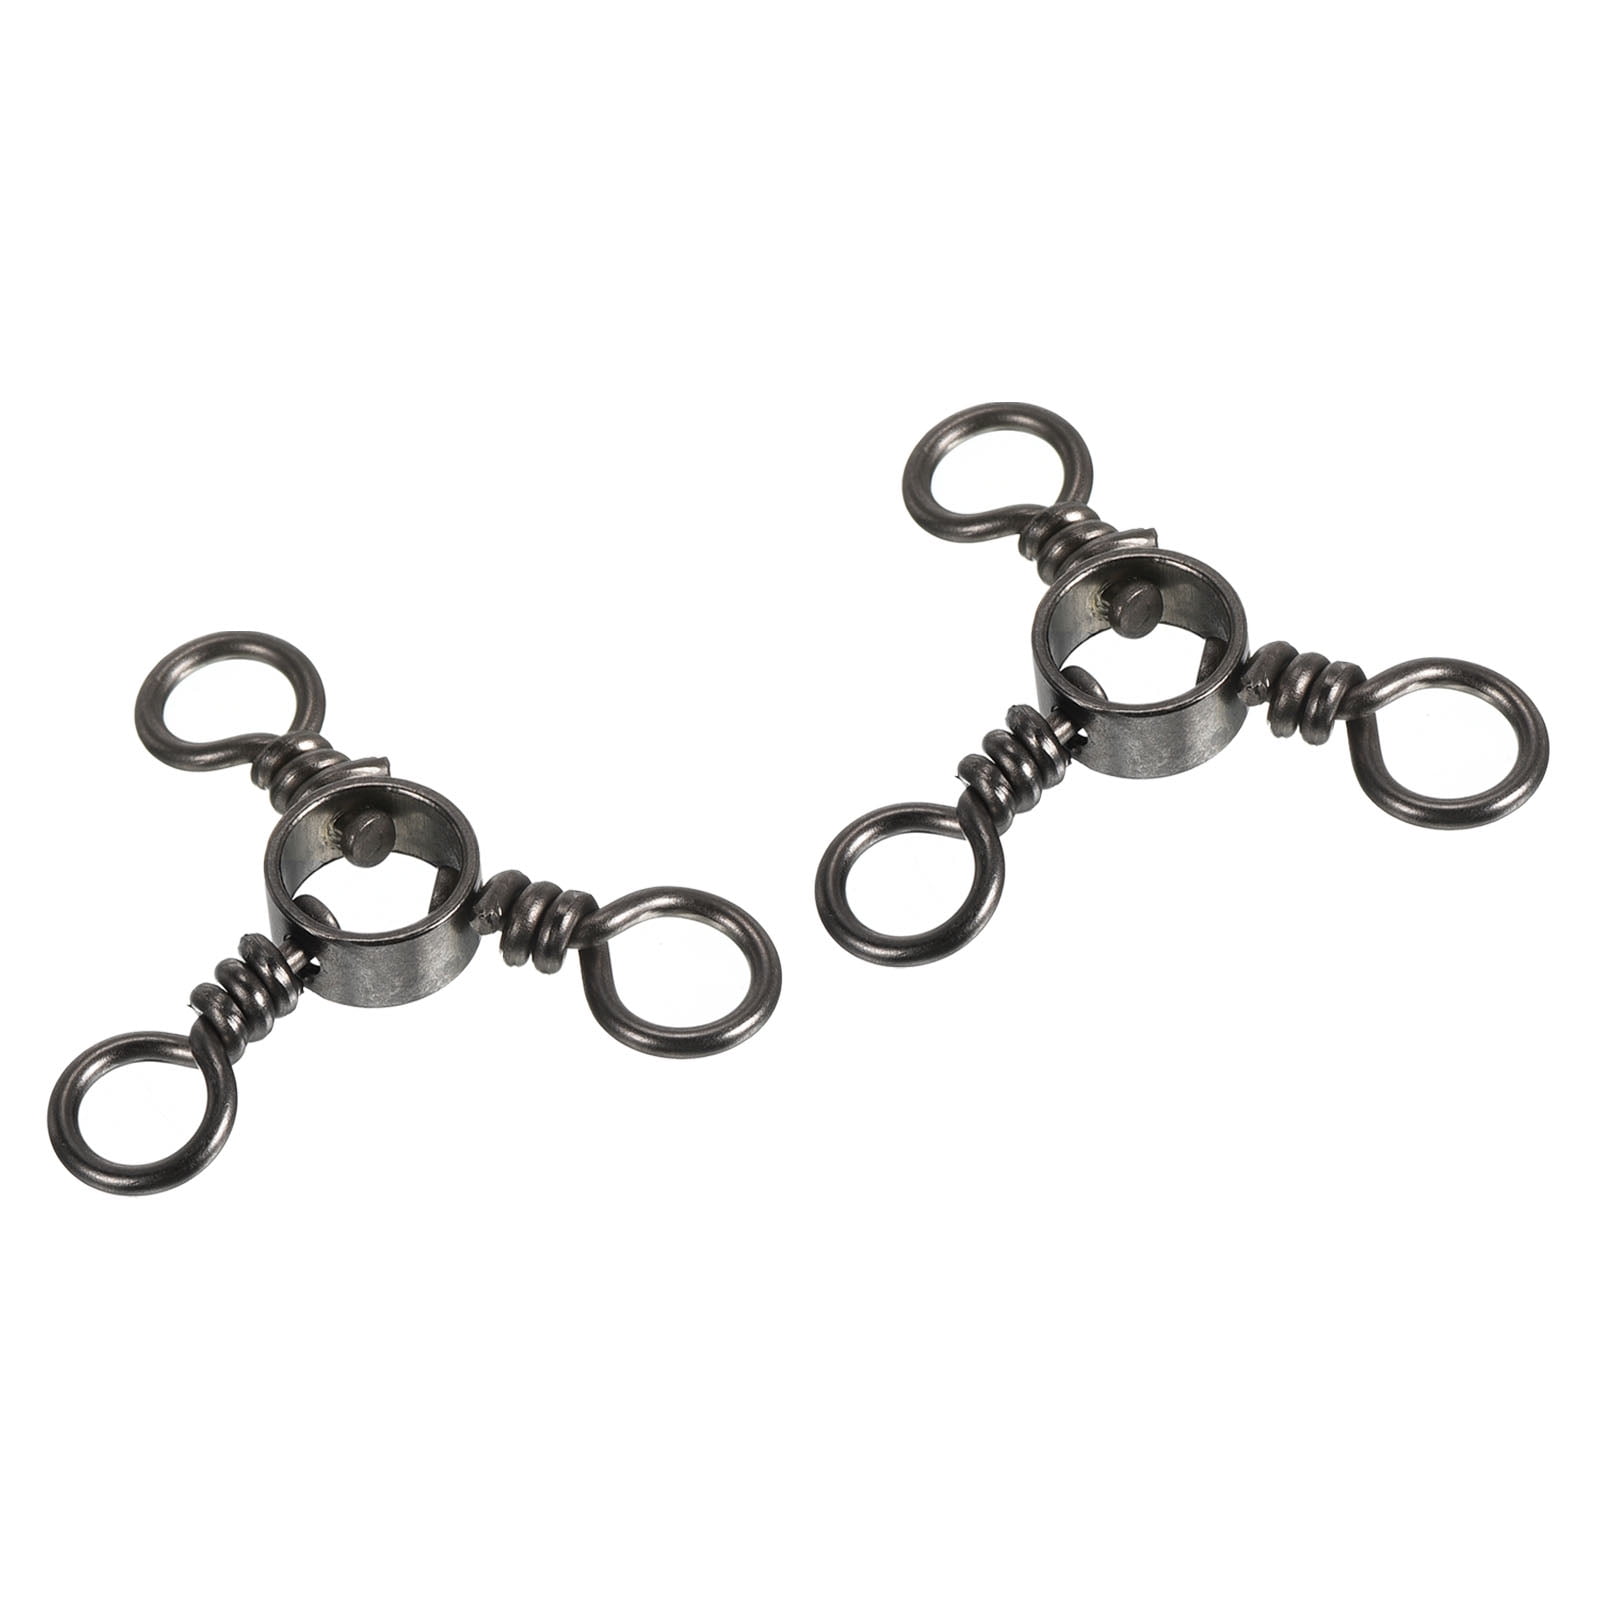 3 Way Swivel, 134lb Stainless Steel Cross Line Terminal Tackle